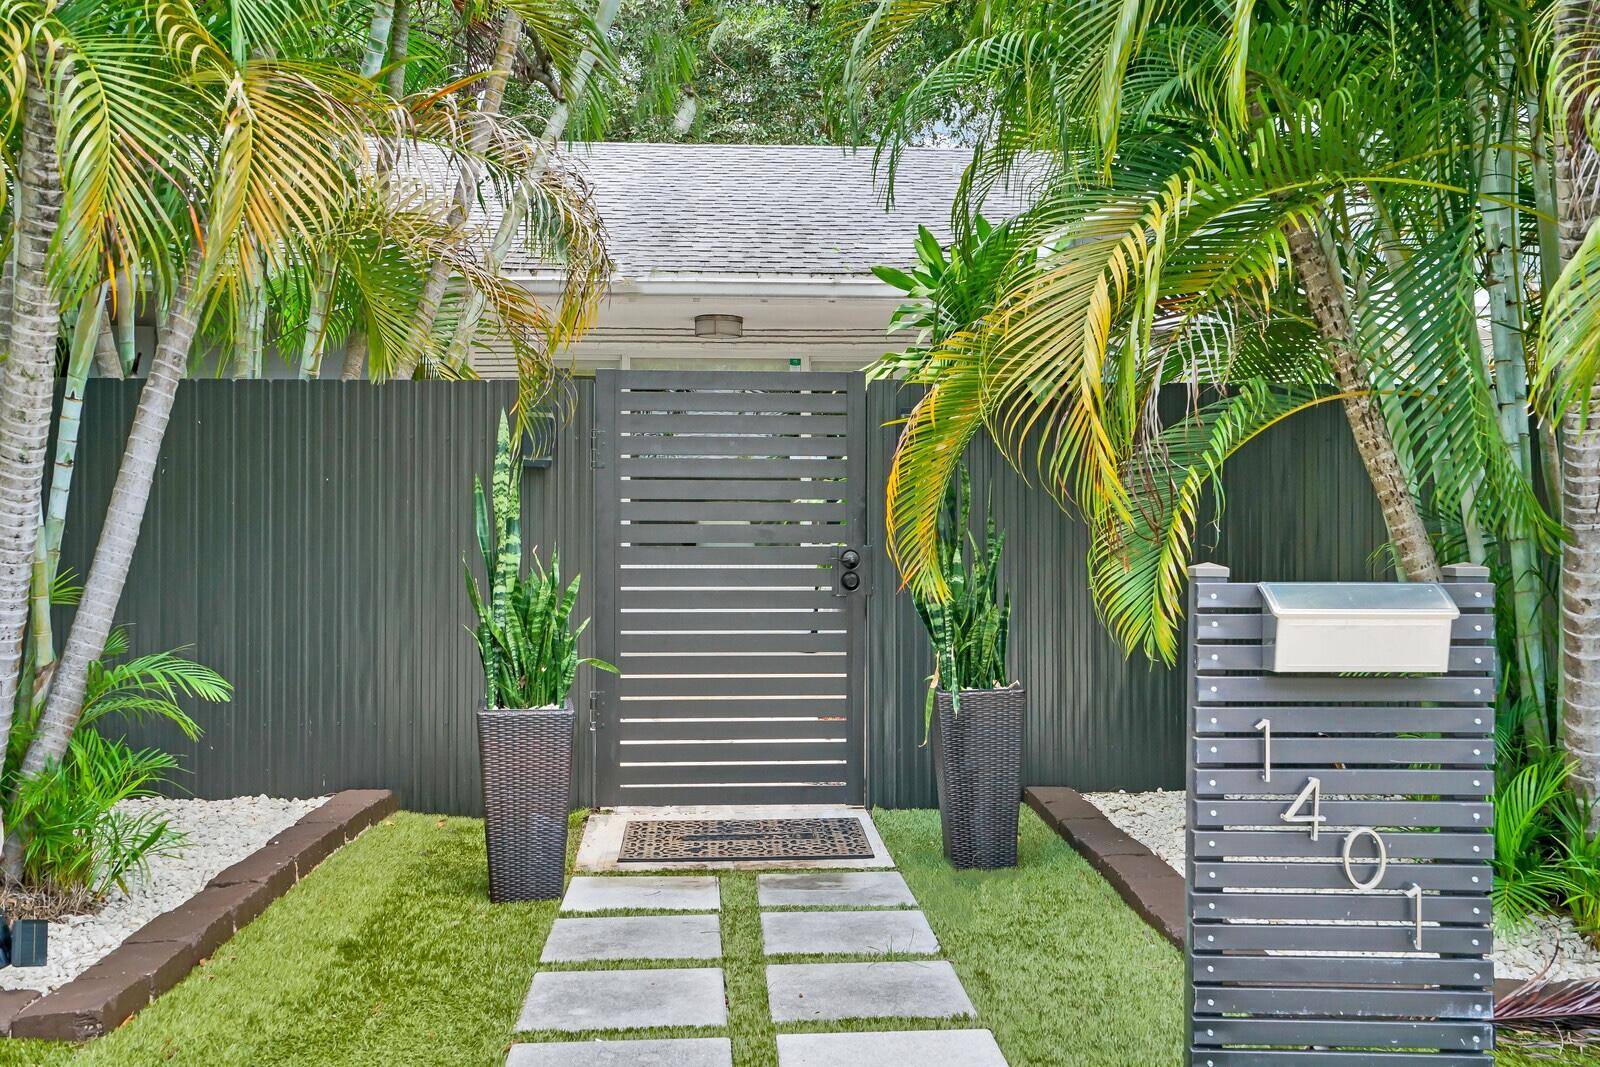 Enjoy views of lush tropical greenery and privacy here in this uniquely adorable bungalow style home.